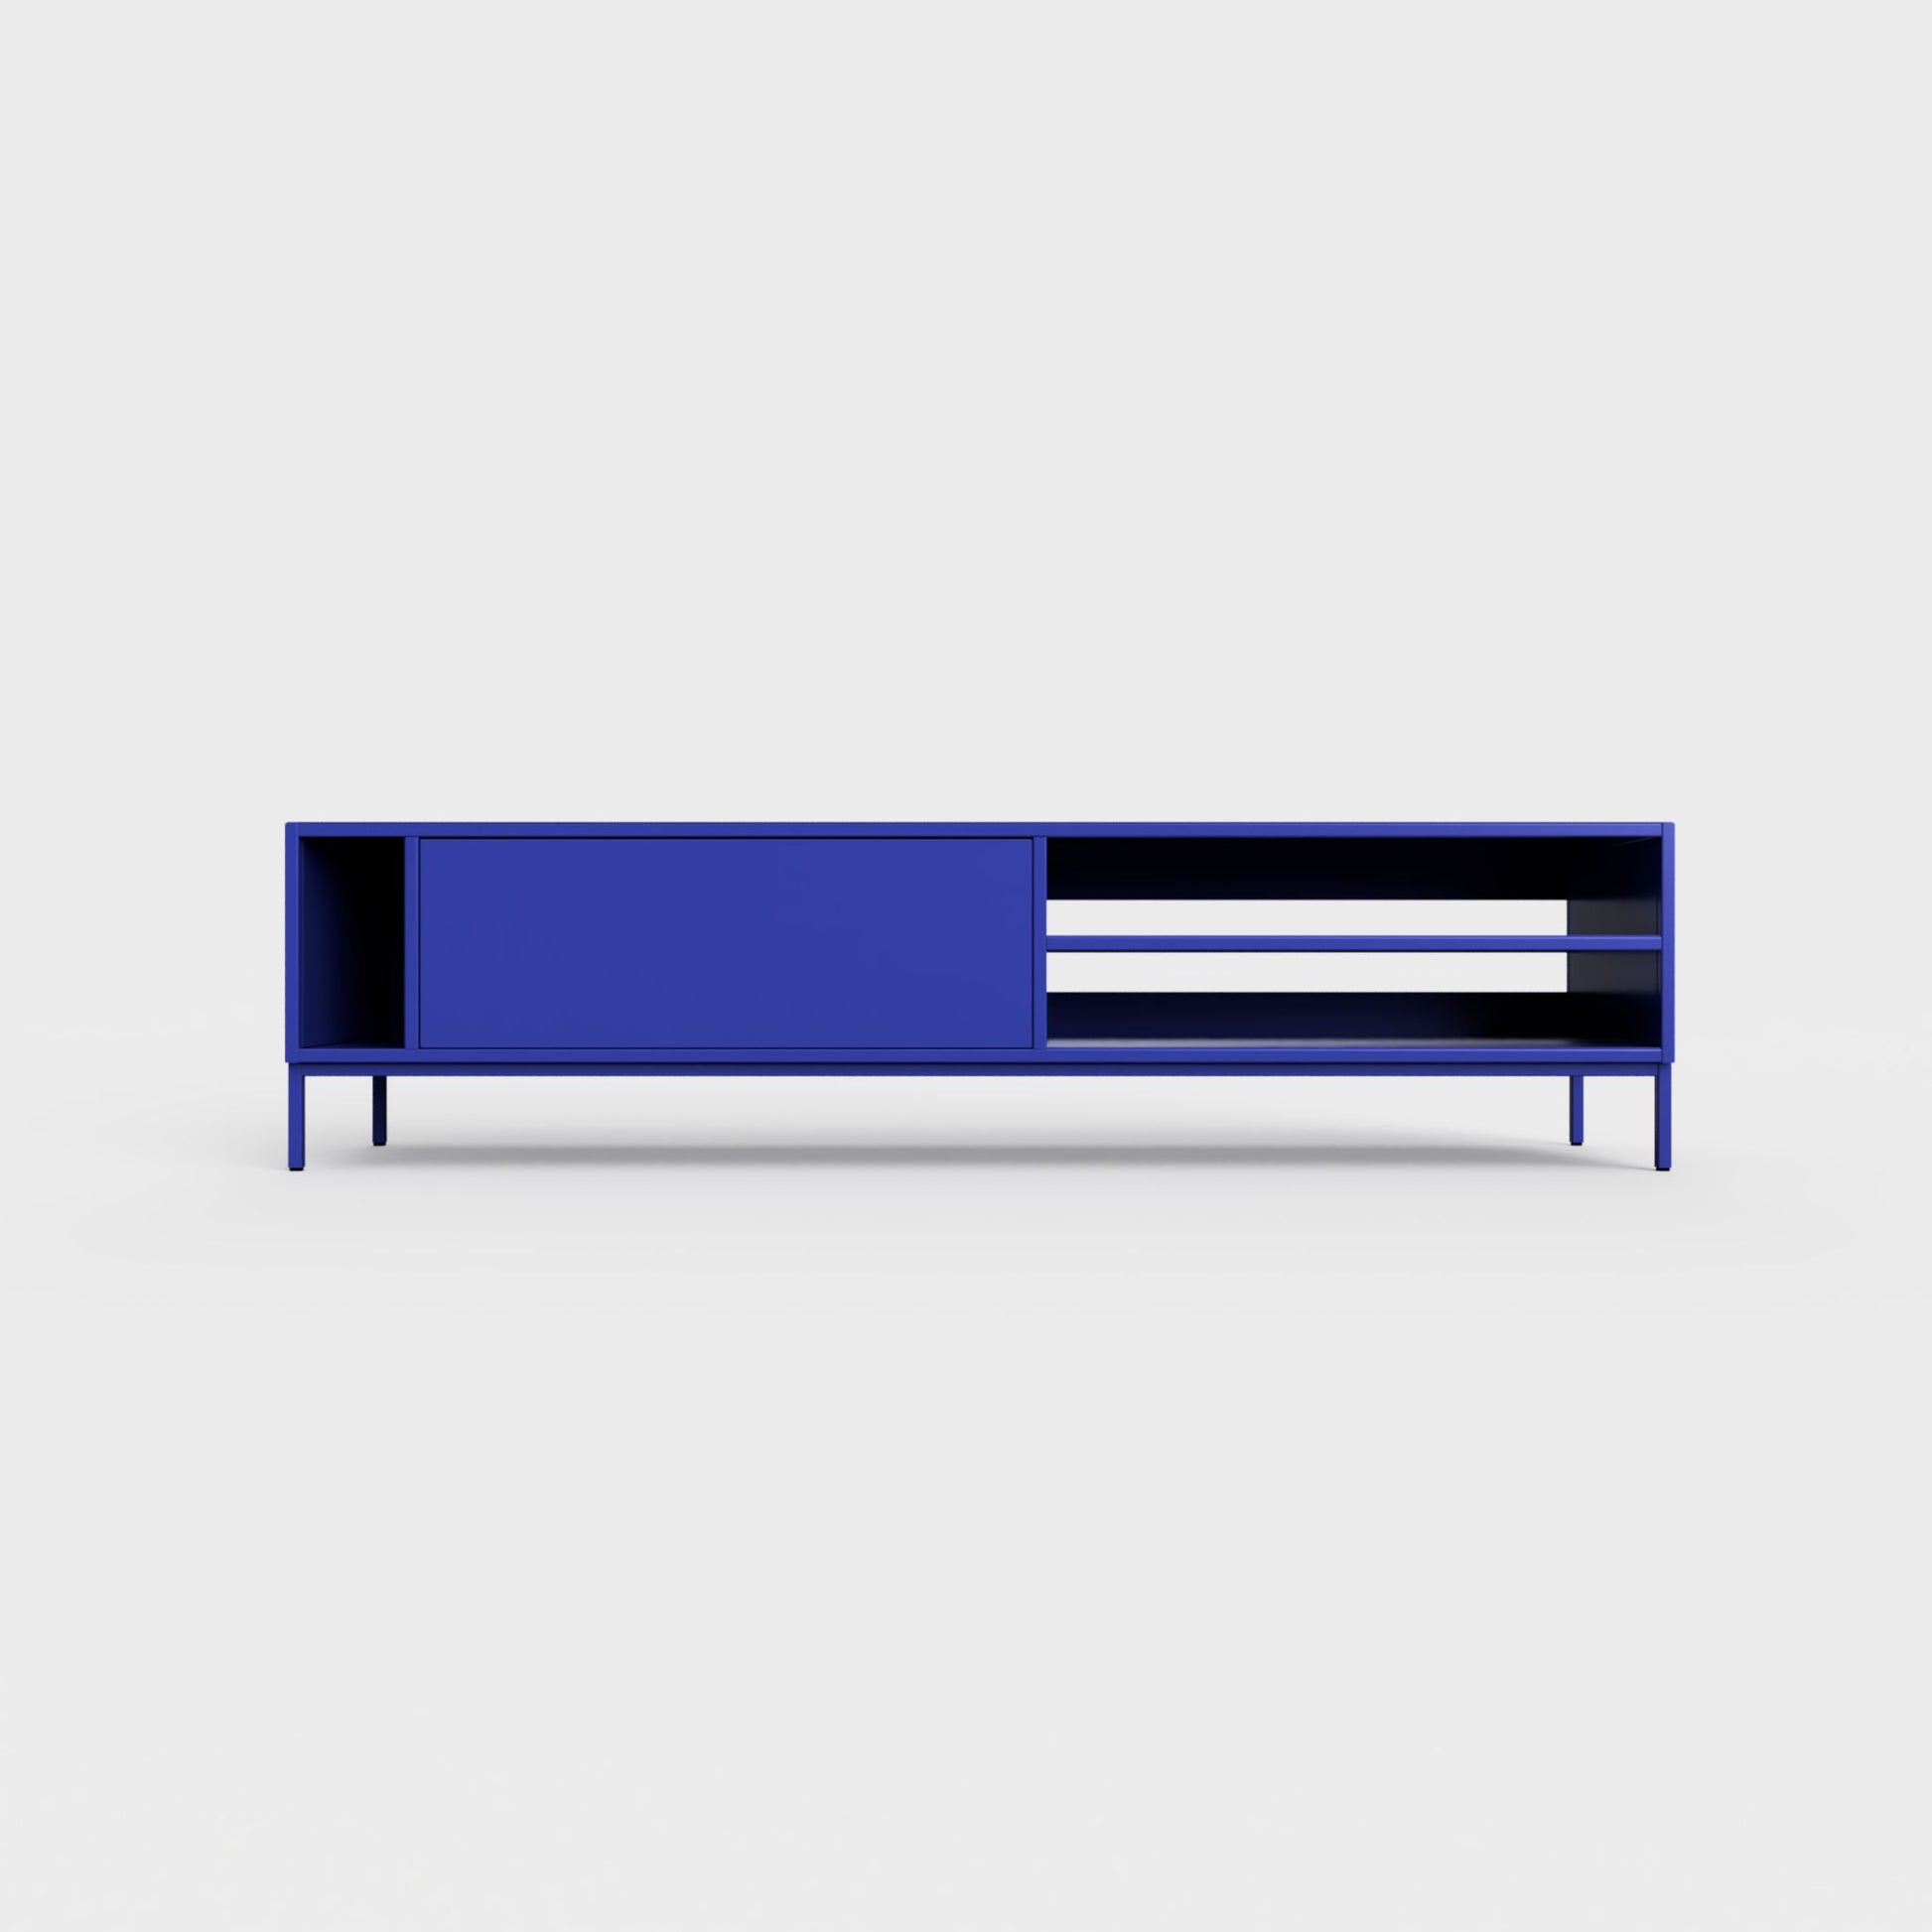 Prunus 03 Lowboard in bluebell blue color, powder-coated steel, elegant and modern piece of furniture for your living room